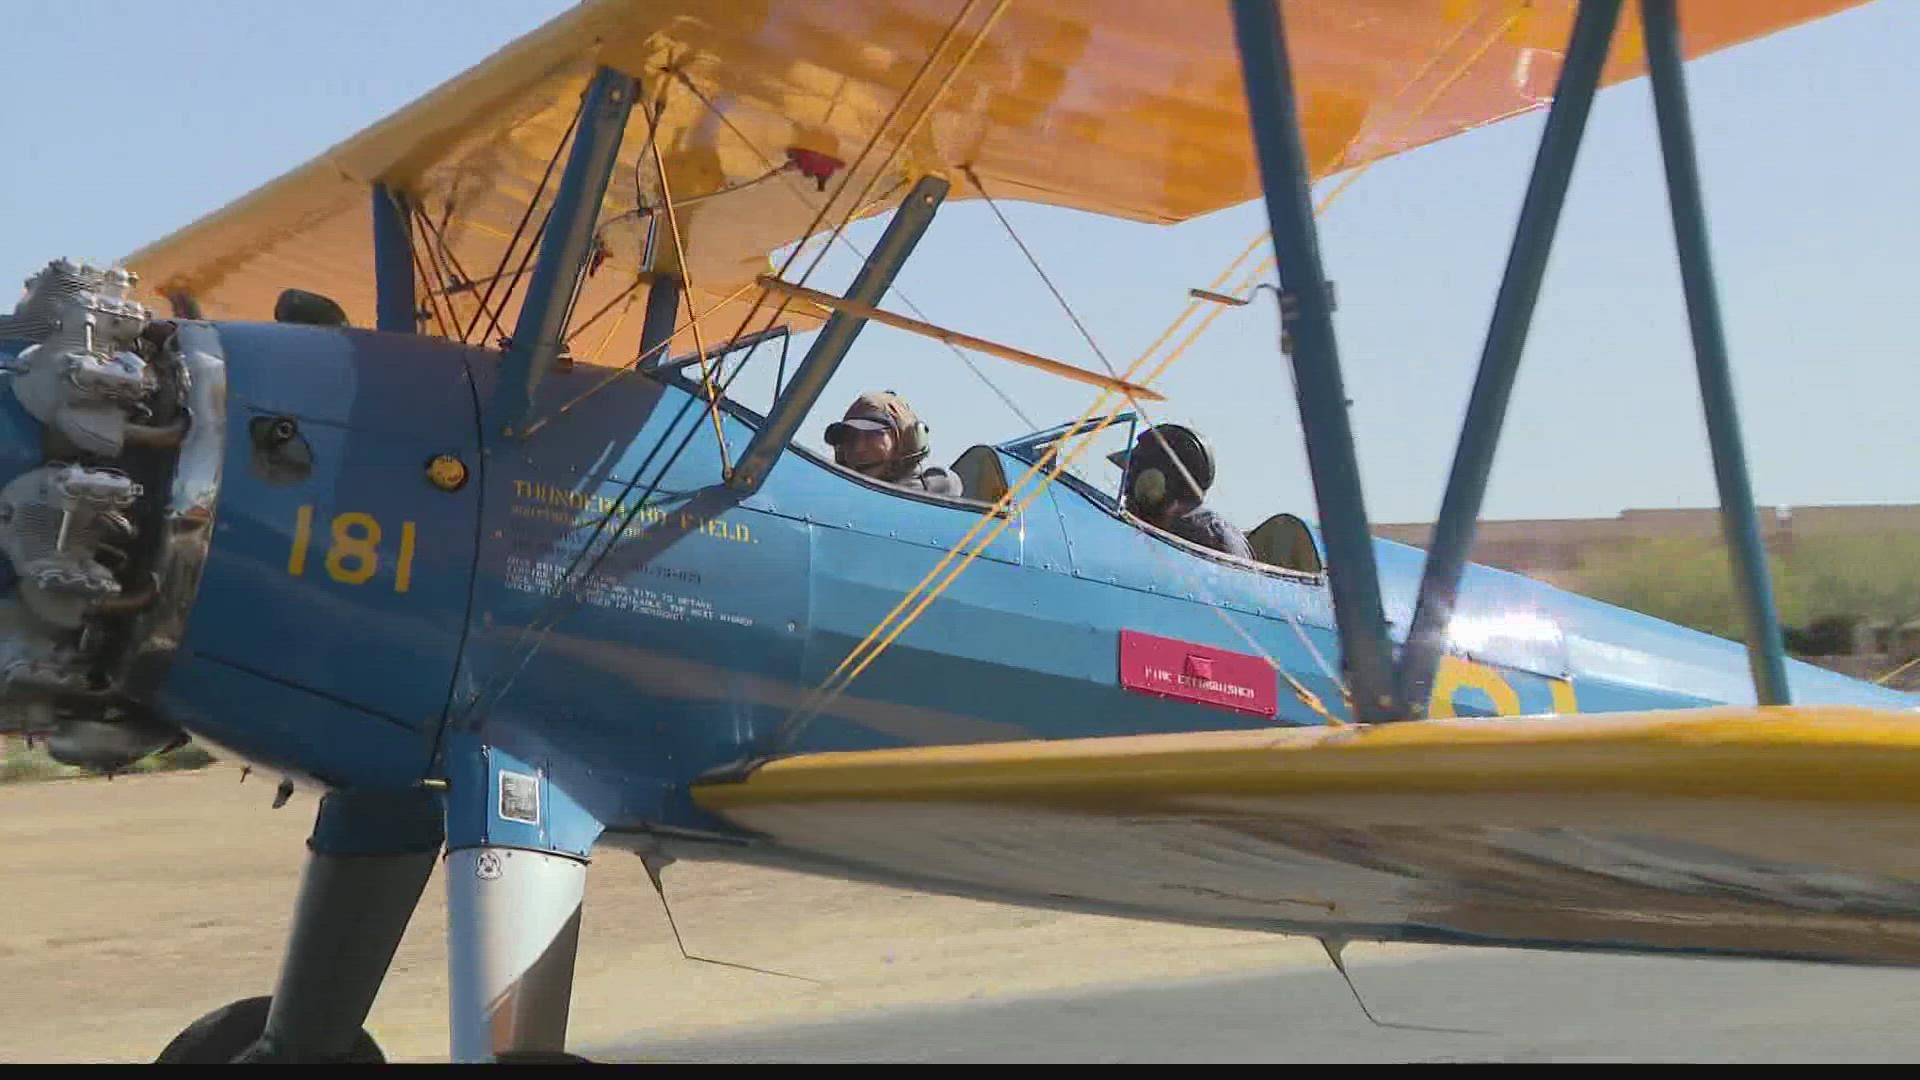 One of our last remaining WWII Navy veterans will turn 100 next month. For his birthday, he got his wish of flying a WWII plane one more time.